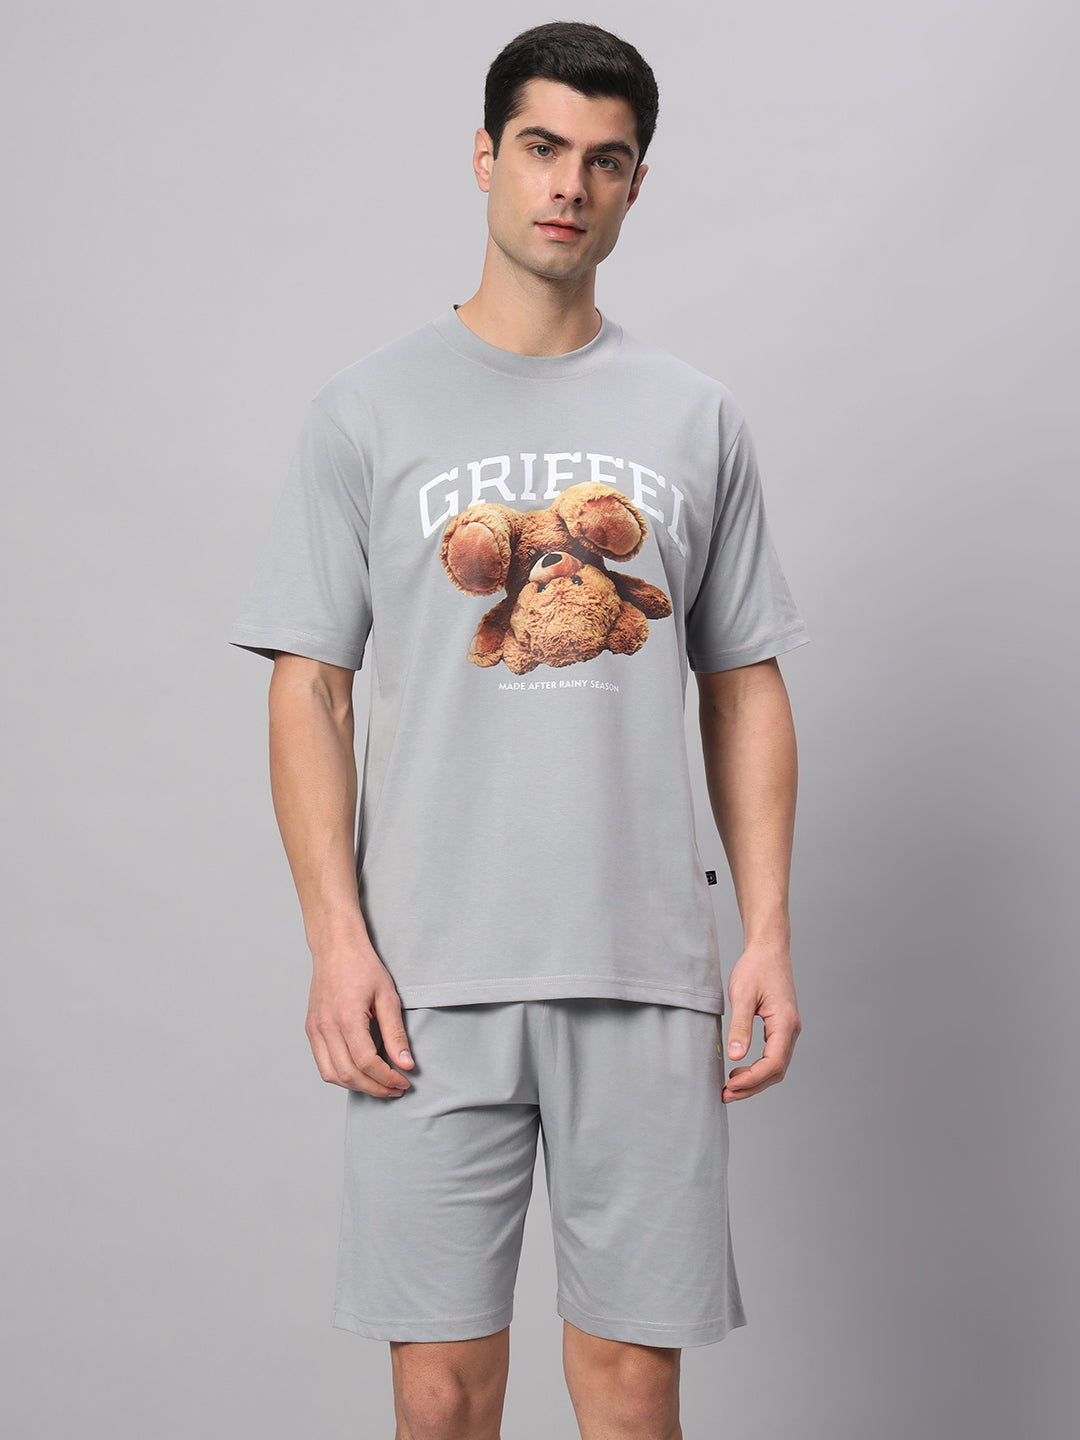 Upside Down Bear T-shirt and Shorts Set - griffel